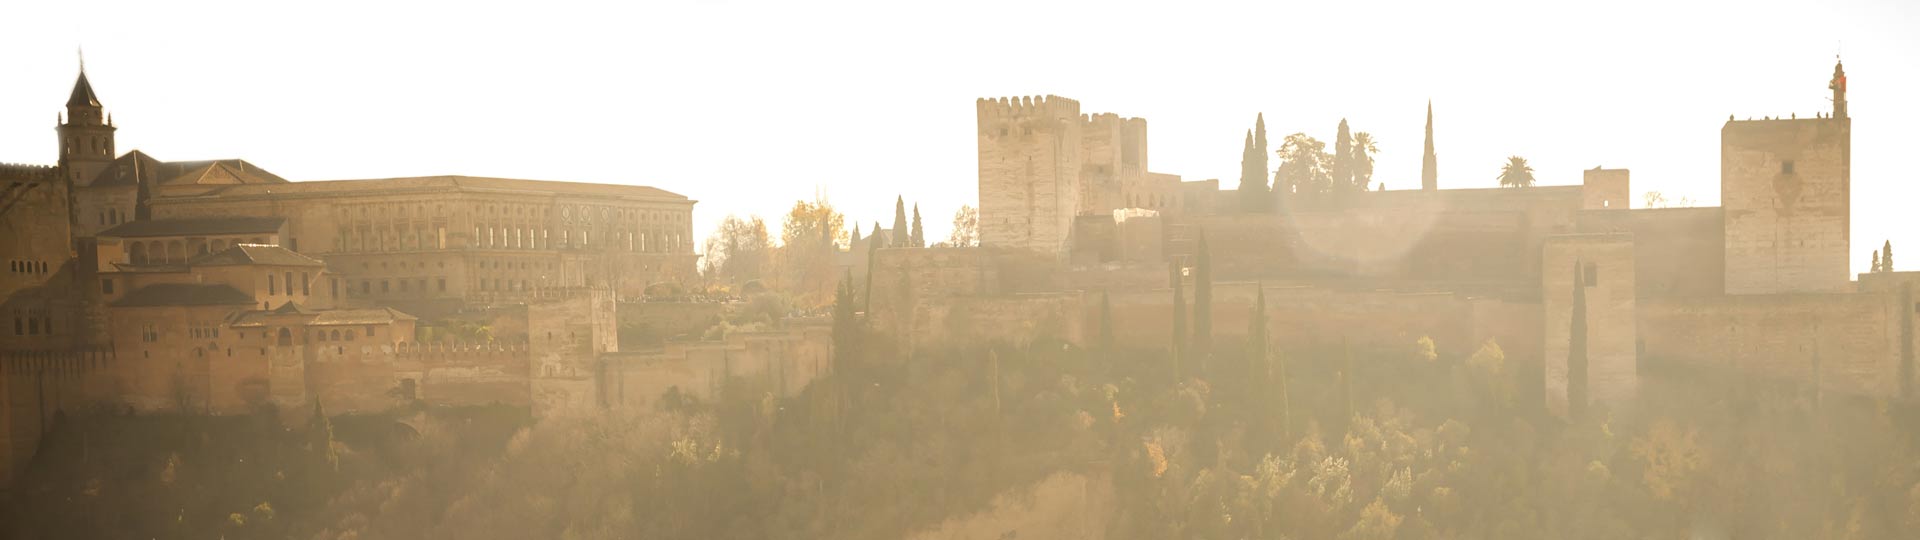 View of the Alhambra from the San Nicolás viewing point.